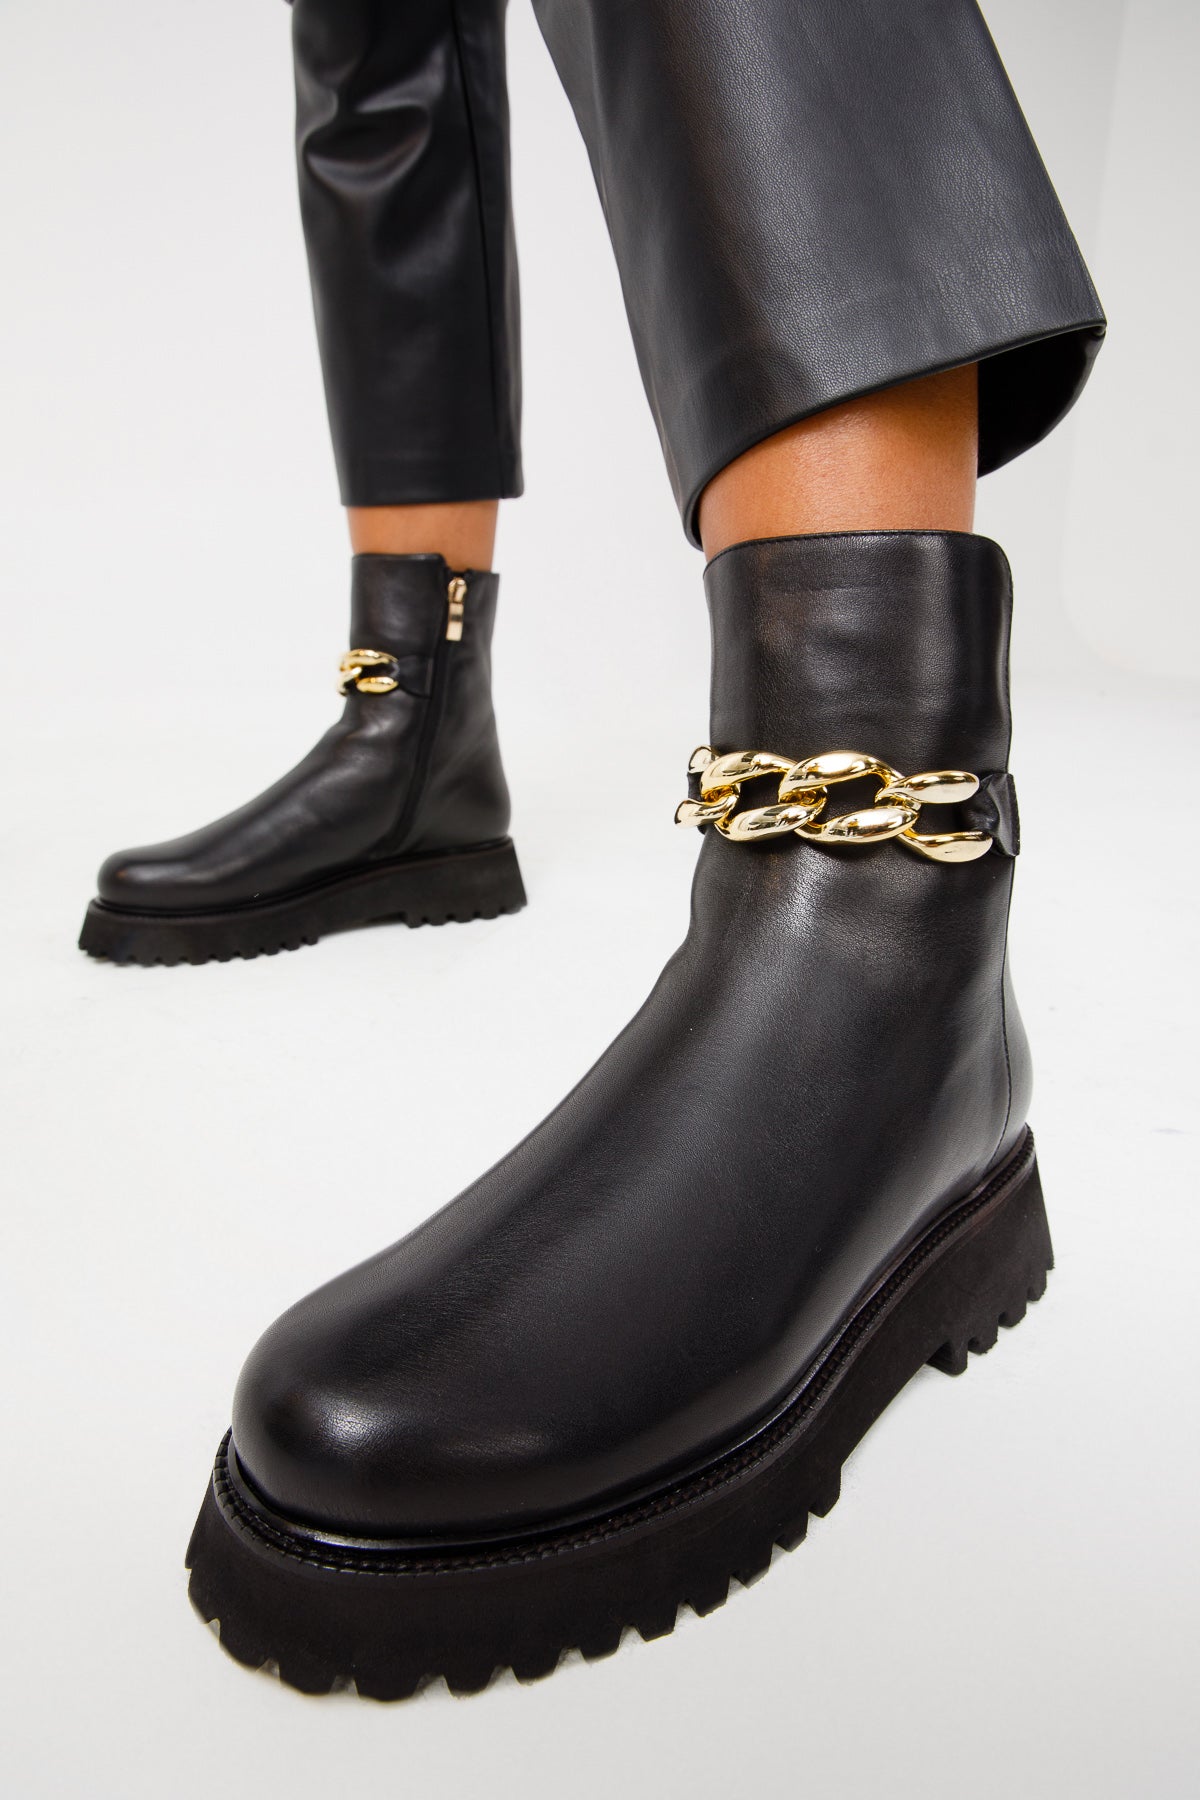 The Nassau Black Leather Ankle Women Boot